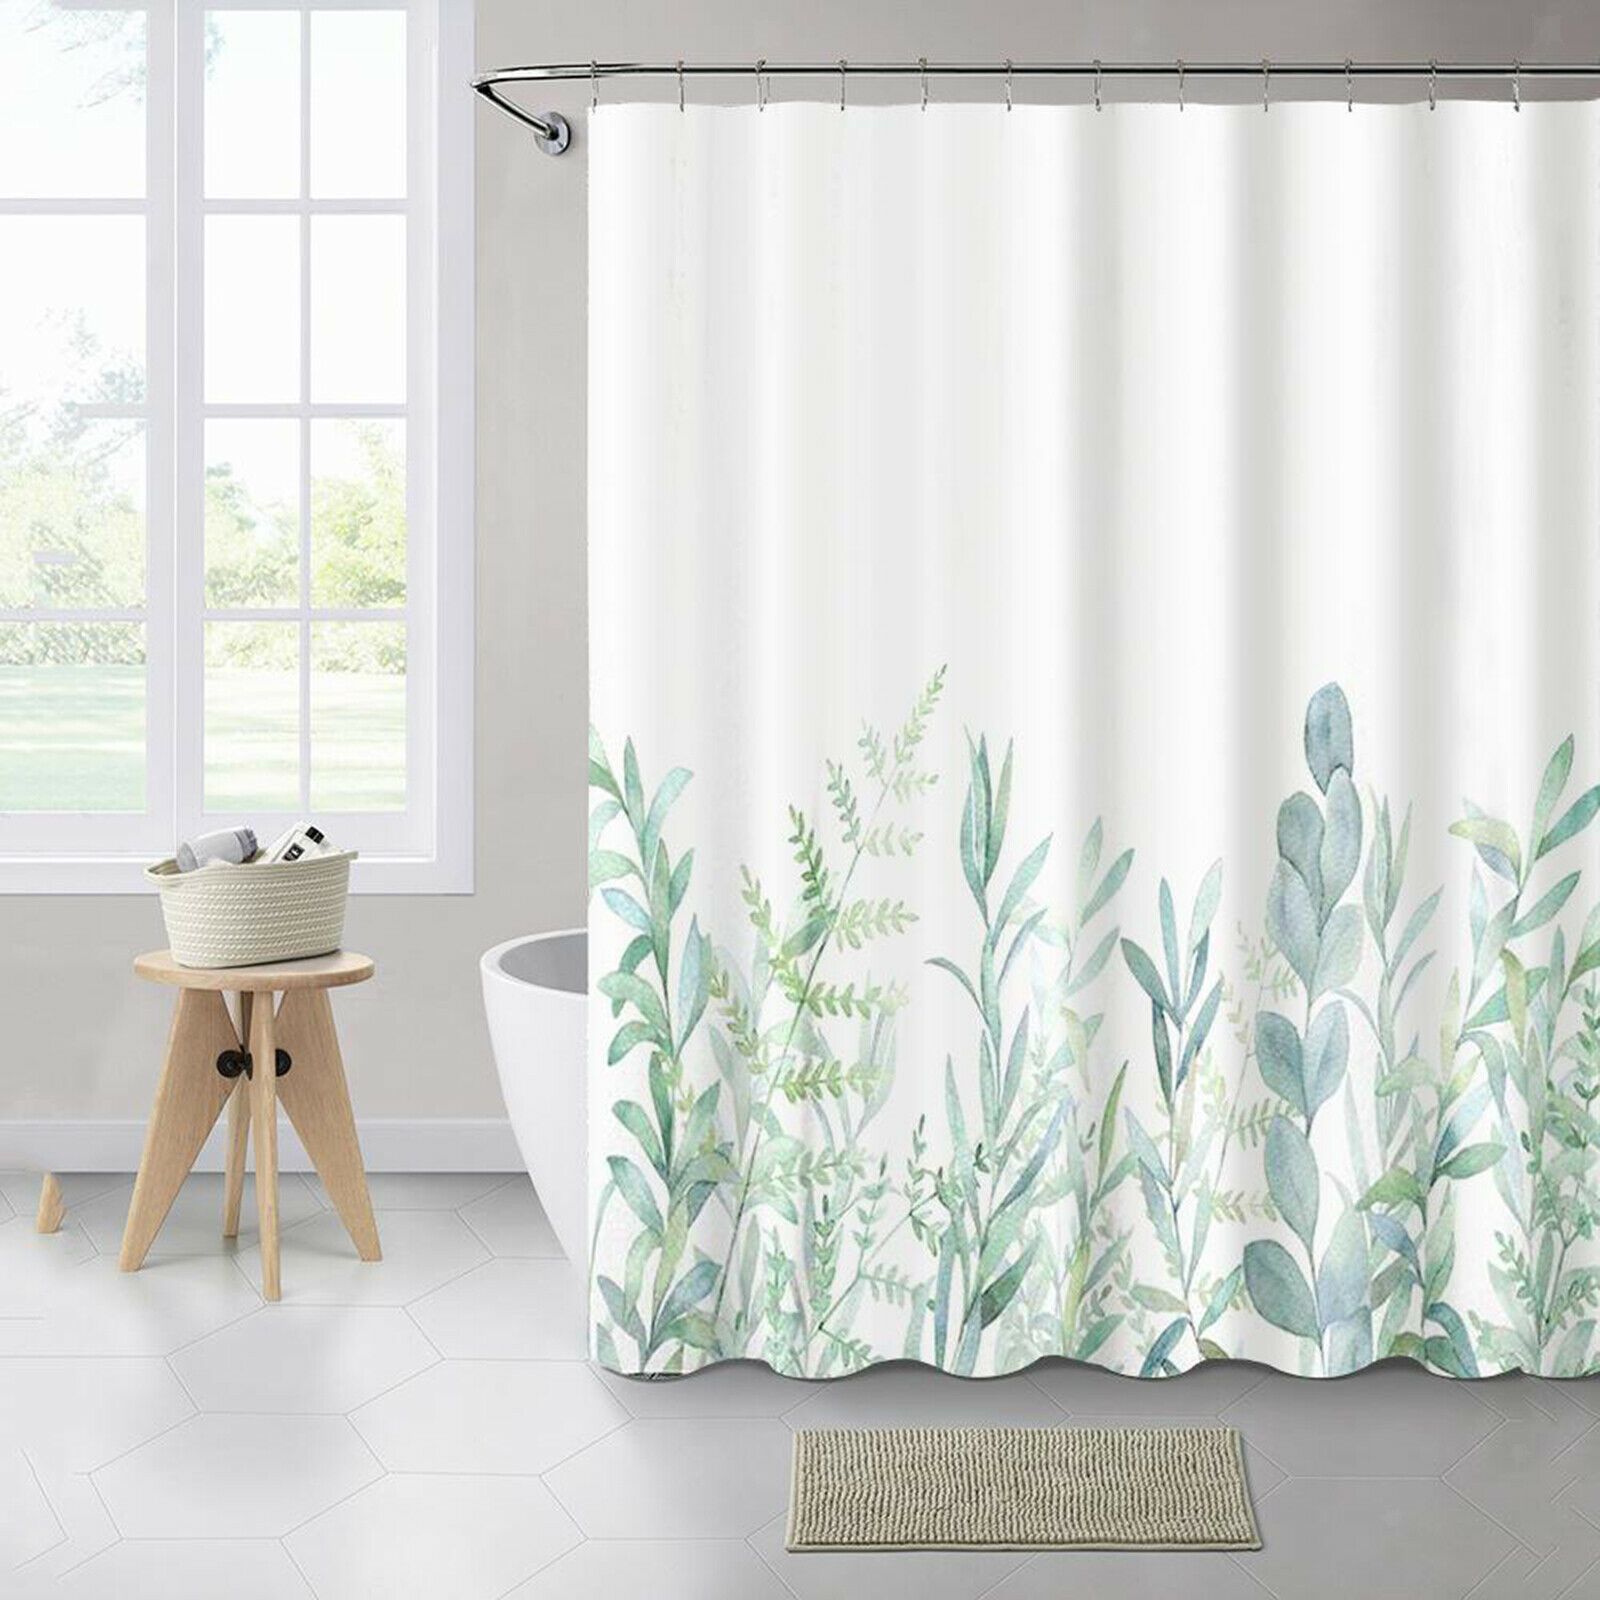 Polyester Fabric Shower Curtain Waterproof With Hooks 180x180cm